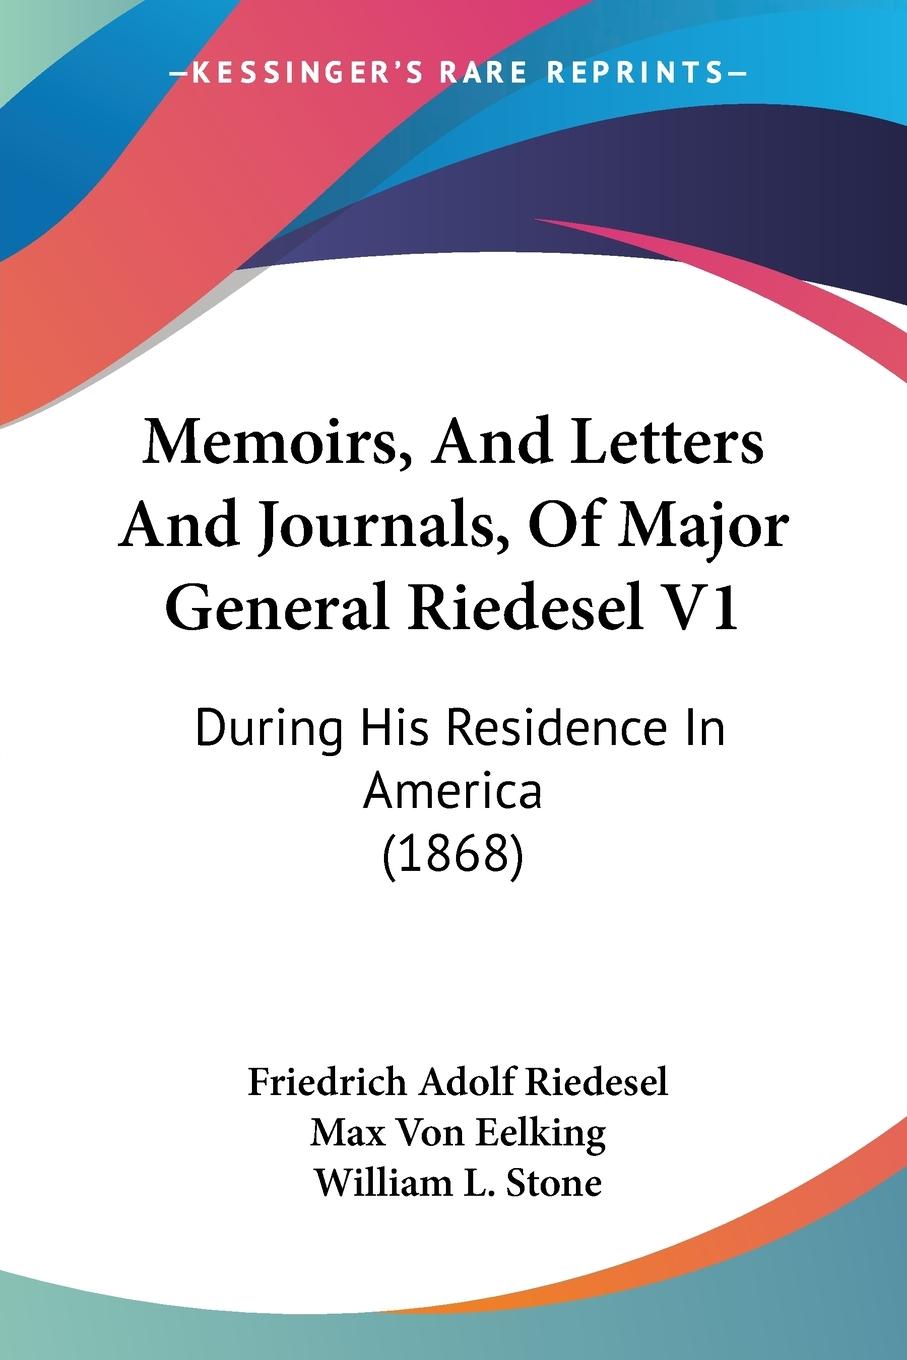 Memoirs, And Letters And Journals, Of Major General Riedesel V1 - Riedesel, Friedrich Adolf Eelking, Max Von